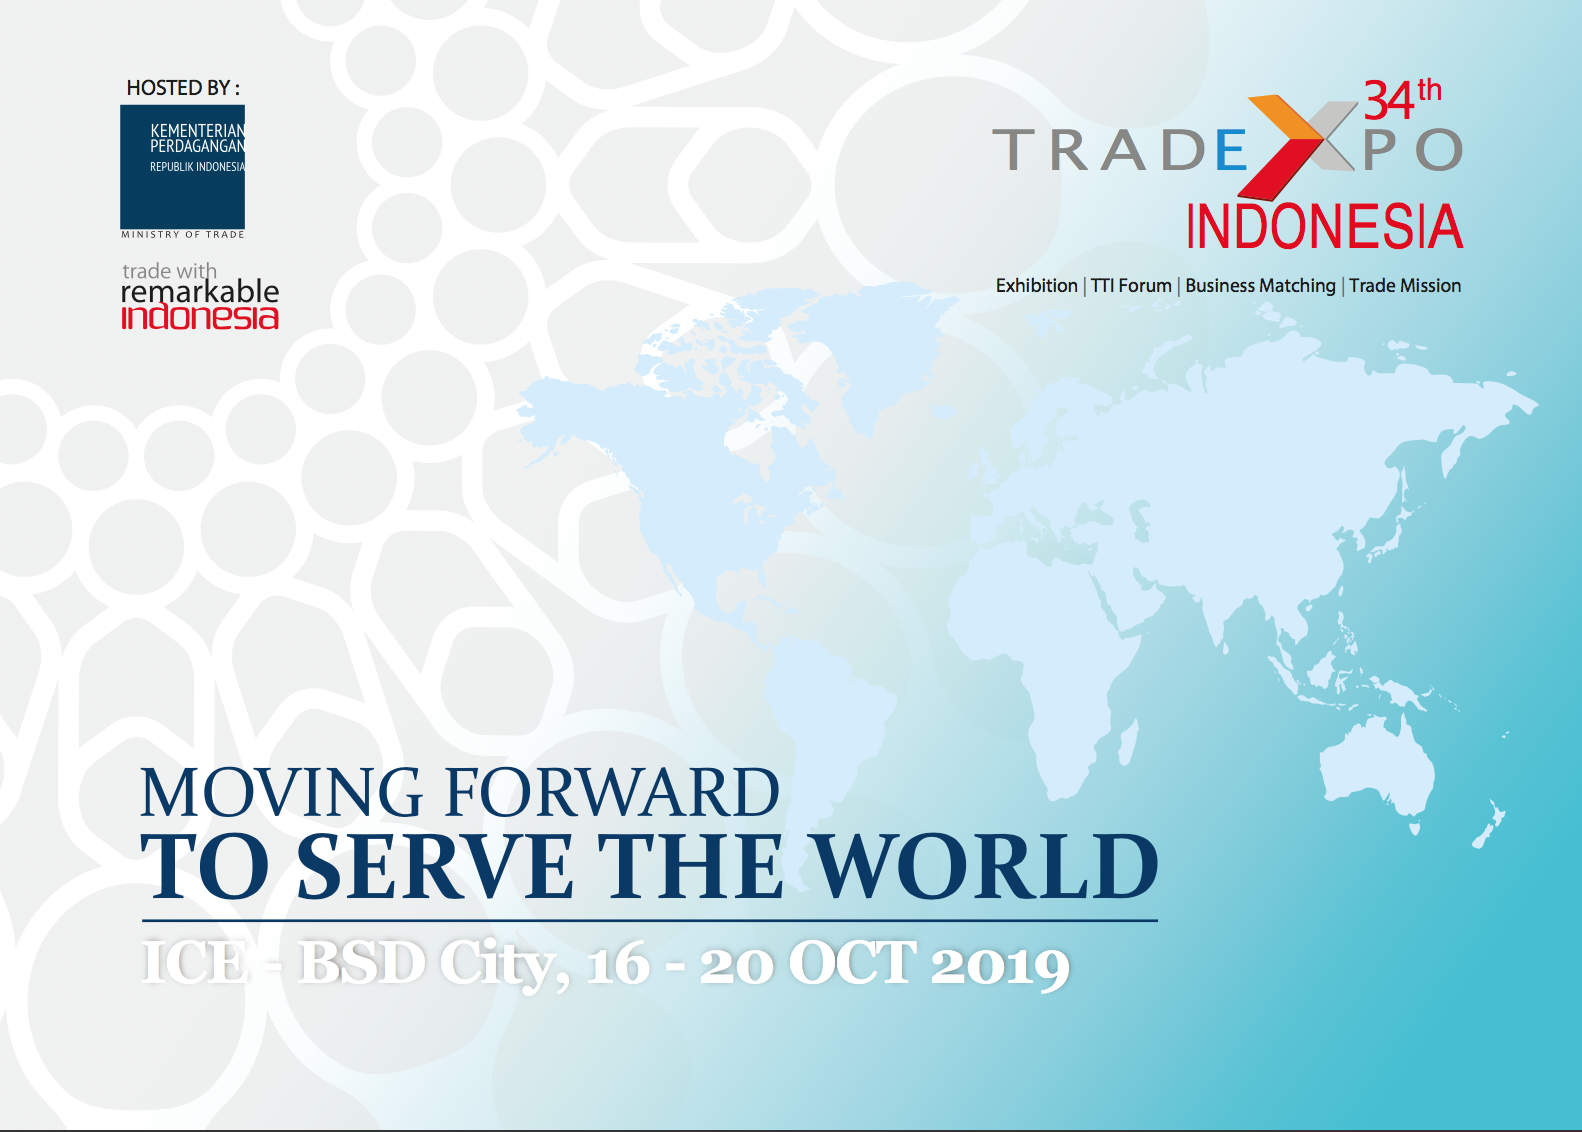 Detail Download Logo Trade Expo Indonesia 2019 Nomer 2